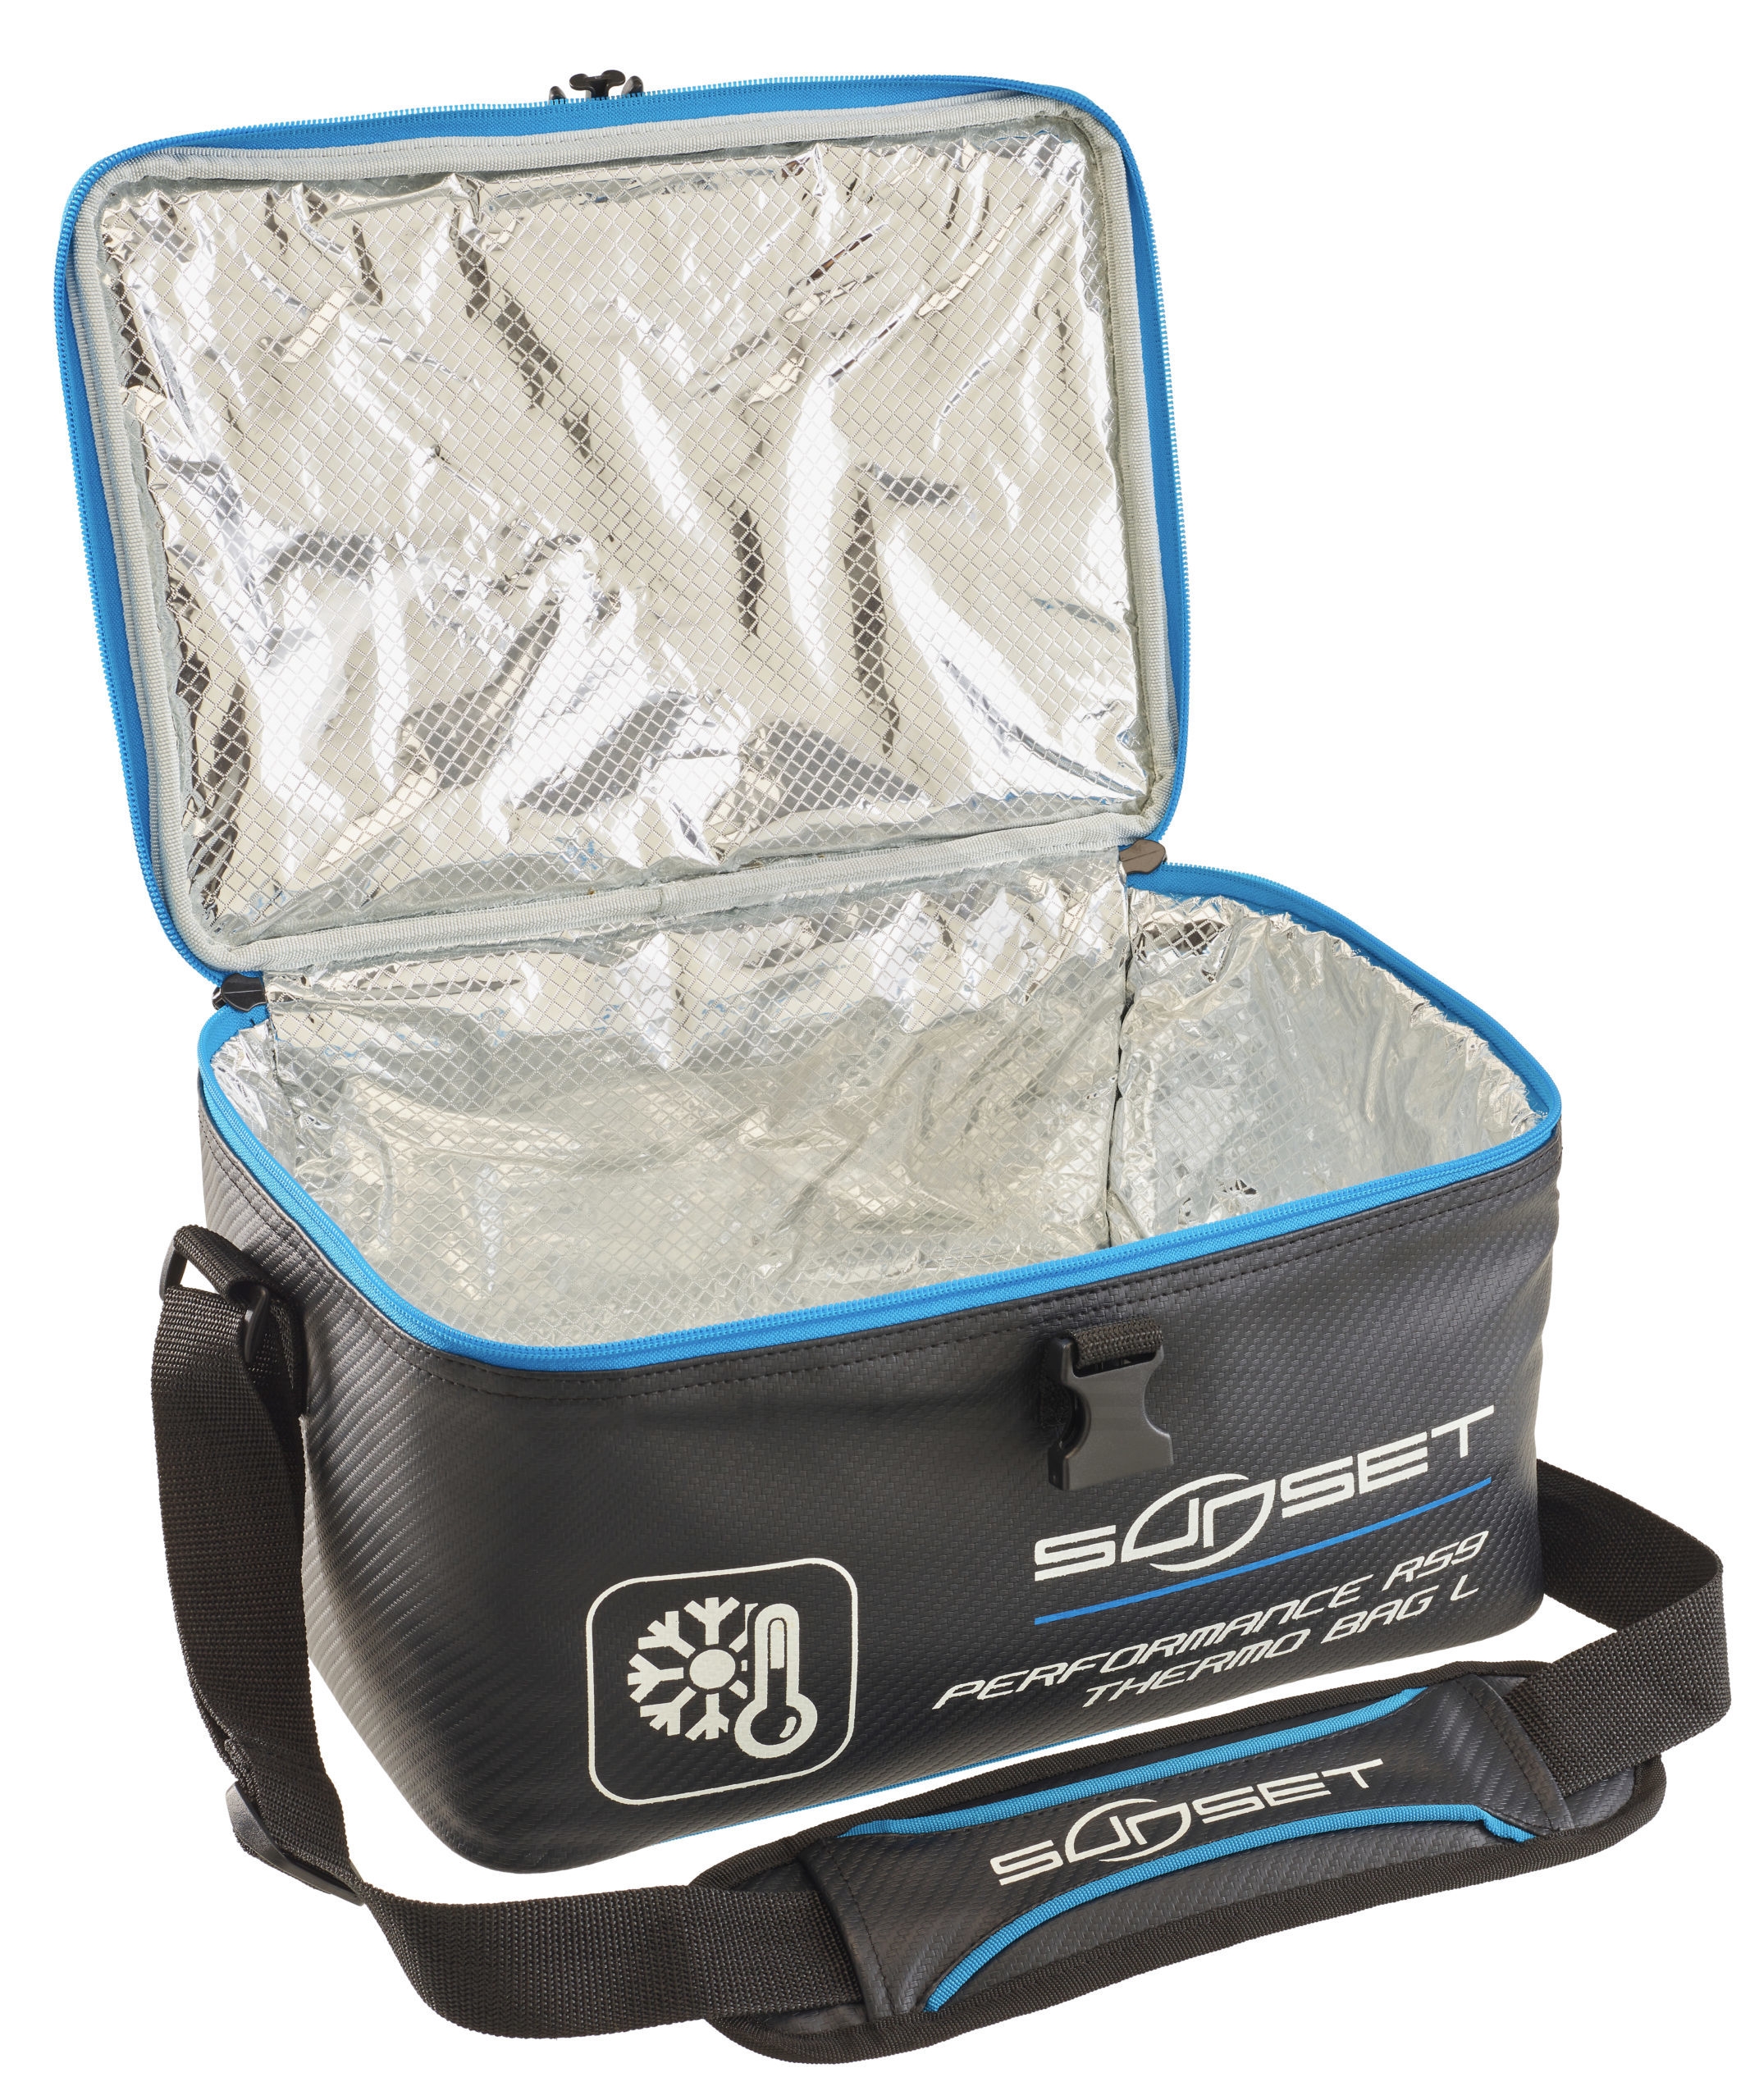 Sunset RS Competition Thermo Bag 